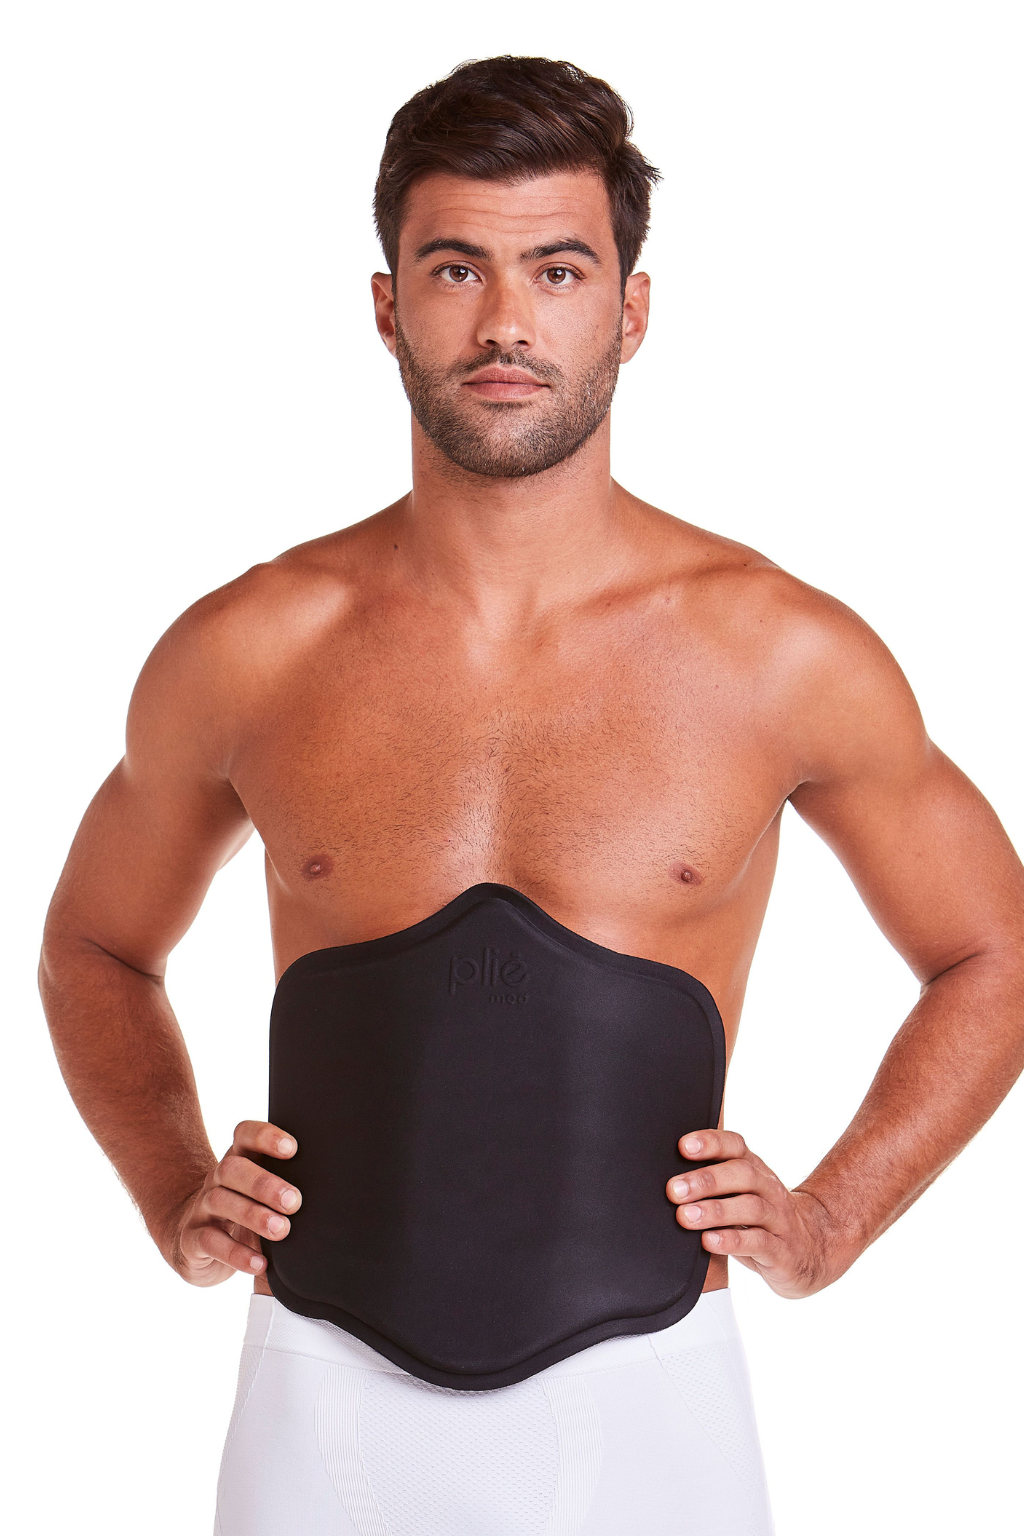 Advanced Unisex Abdominal Support pad for Postoperative Recovery - METRO  BRAZIL